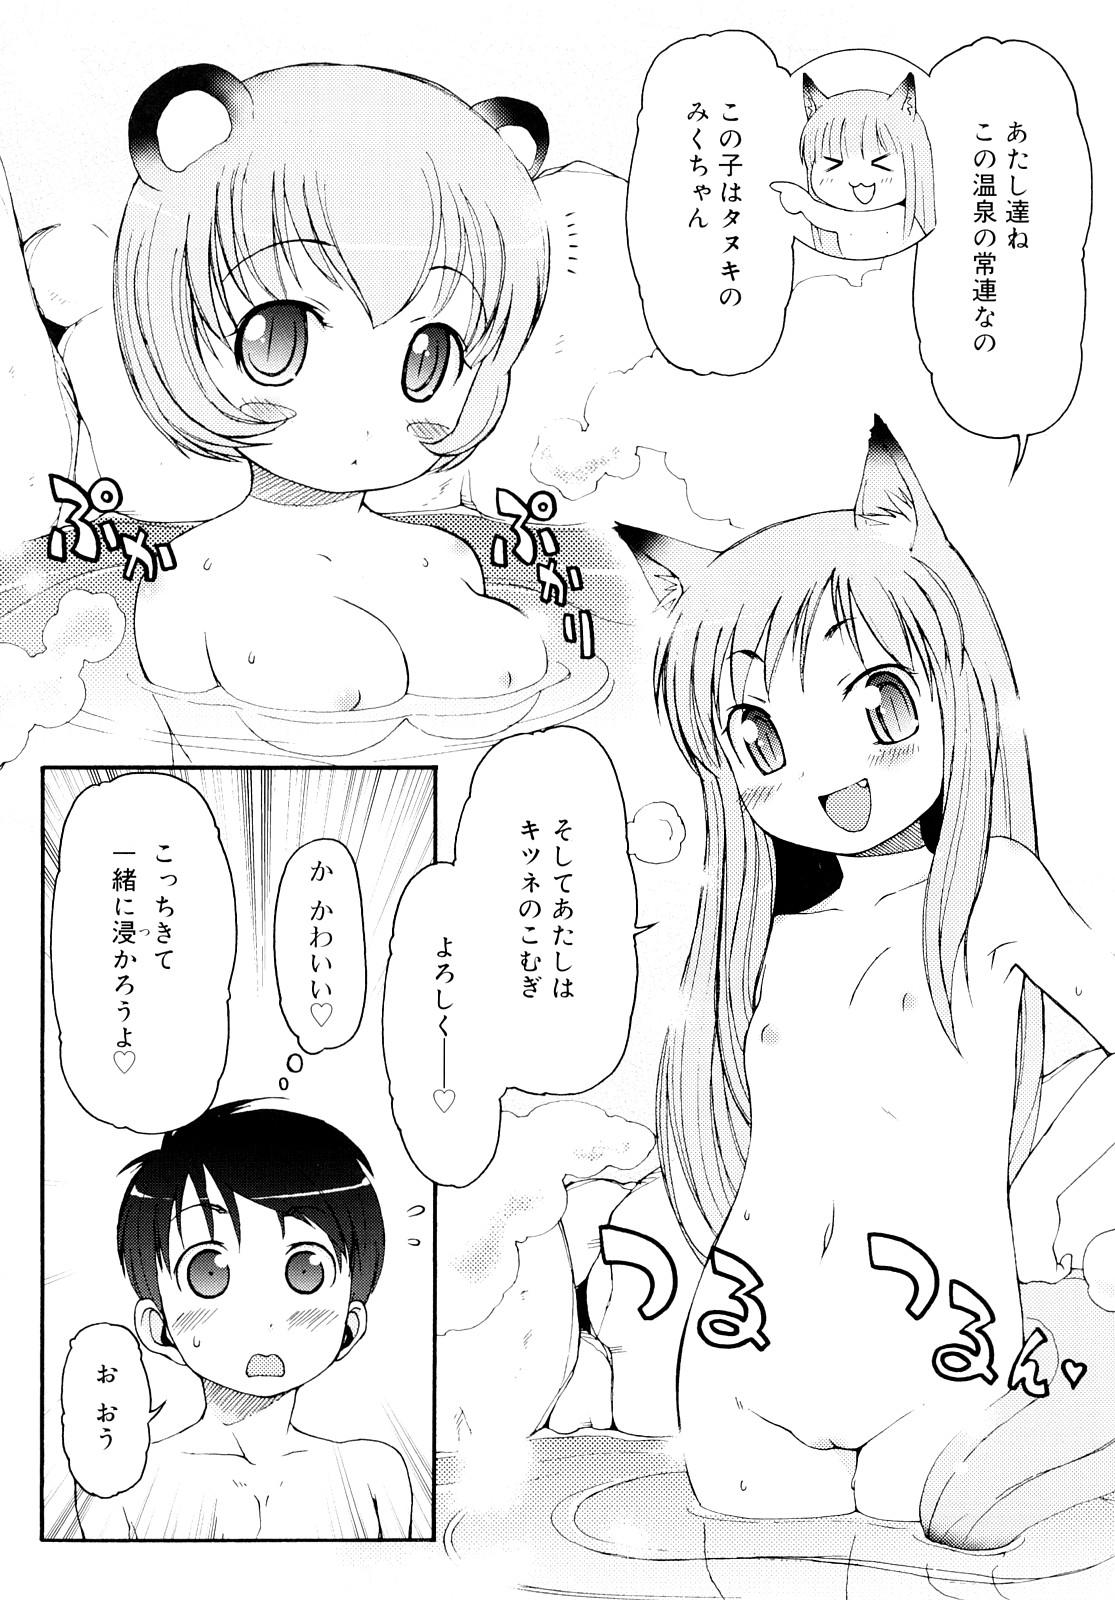 Home Kemomimi Onsen e Youkoso - Welcome to Kemomimi Onsen Couples - Page 8